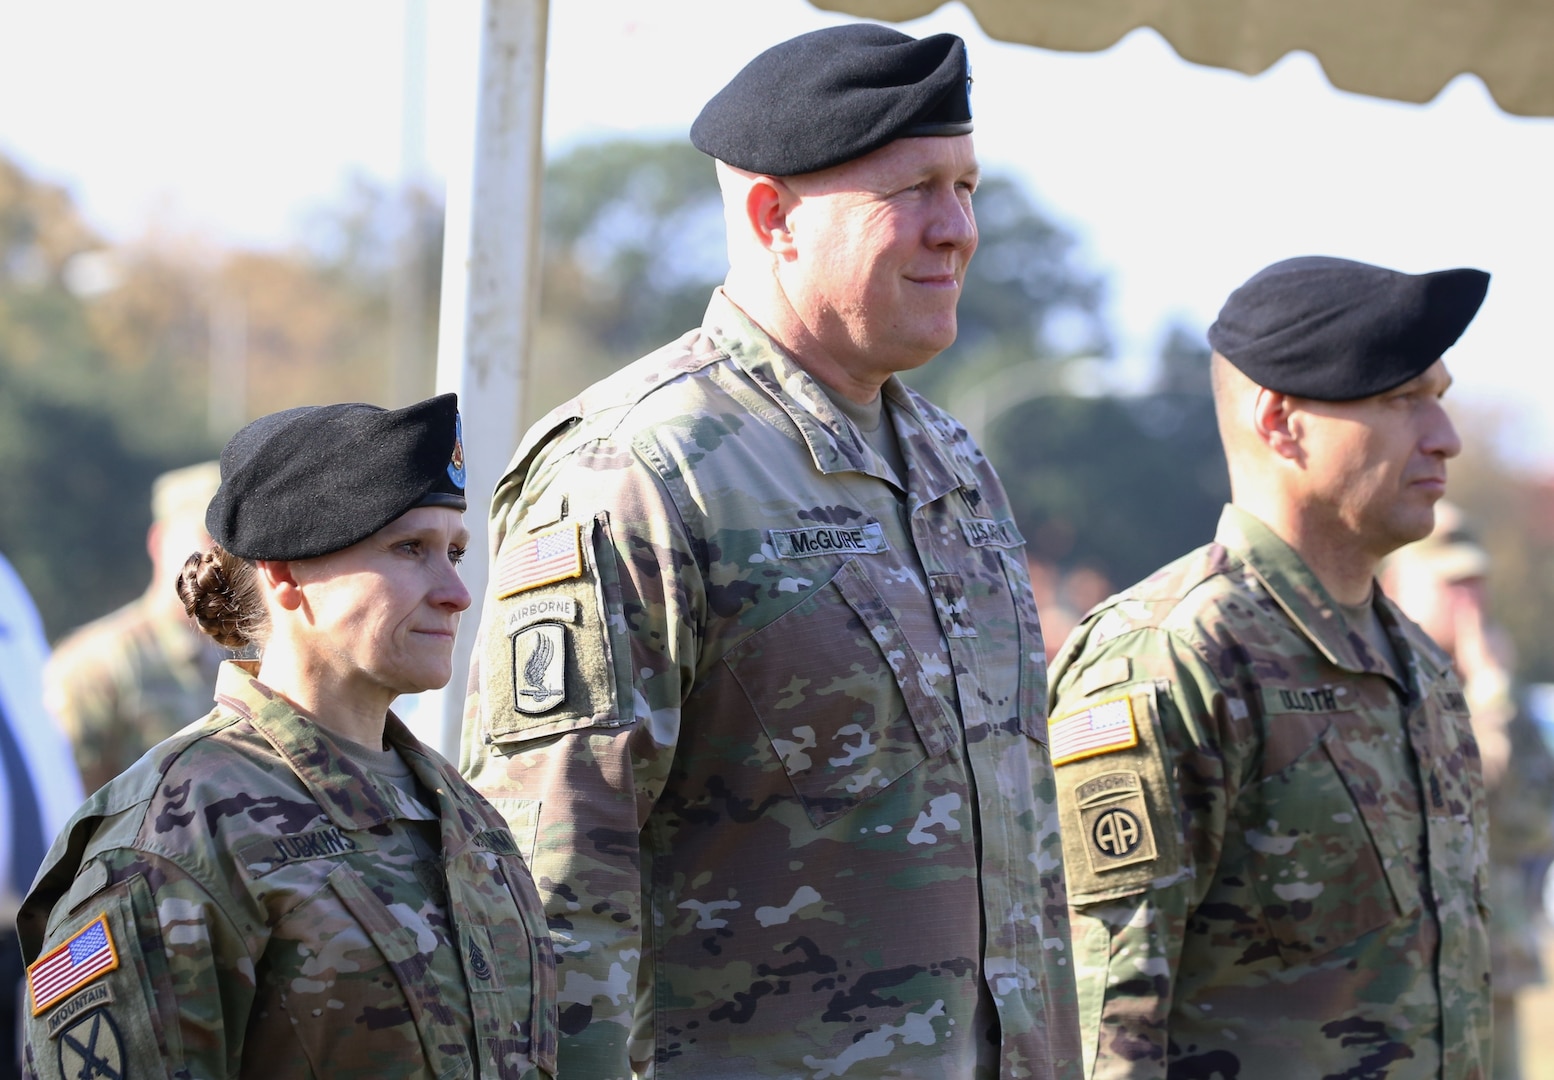 (From left) The outgoing command sergeant major of U.S. Army Installation Management Command, Command Sgt. Maj. Melissa Judkins; IMCOM’s Acting Commanding General, Maj. Gen. Timothy McGuire; and IMCOM’s new Command Sgt. Maj. Joe Ulloth during the change-of-responsibility ceremony at Joint Base San Antonio-Fort Sam Houston Nov. 19.